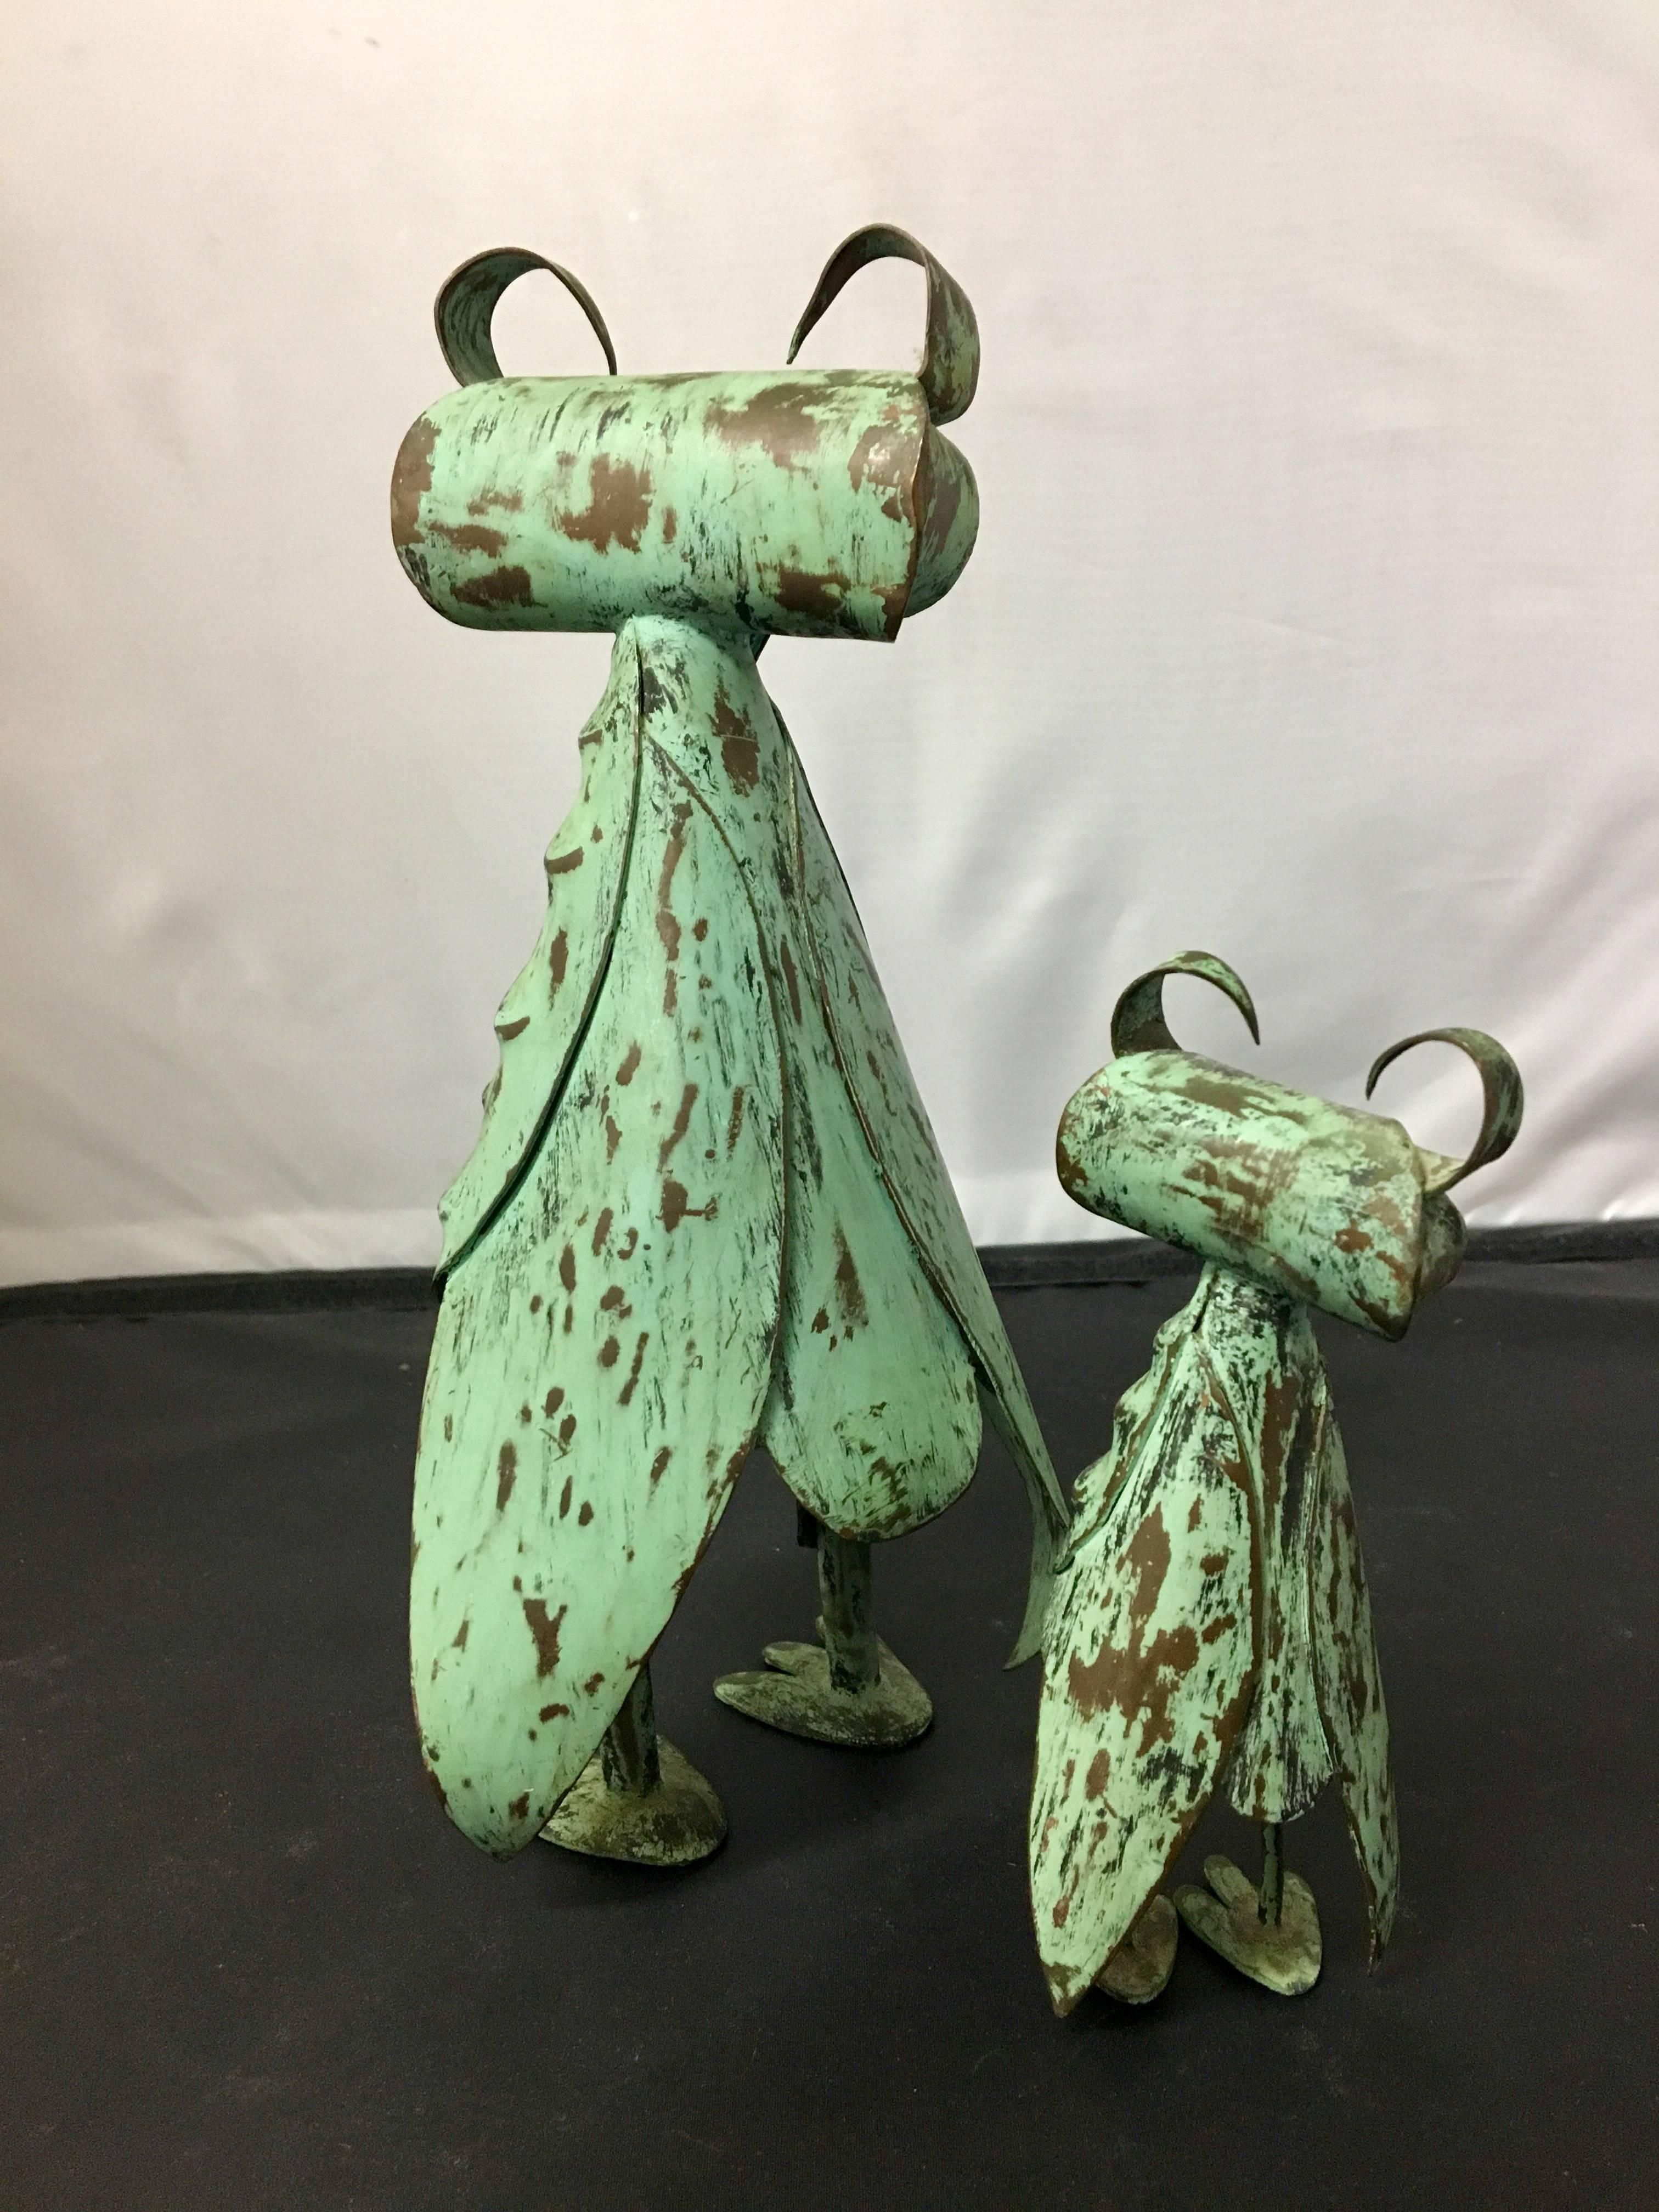 Eclectic pair Mid-Century, patinated copper, hand-hammered owl sculptures by Mexican artisans Los Castillo. Signed and stamped, circa 1950s; one owl is 9" tall and the second is 5" tall. Excellent vintage condition with a great Verde